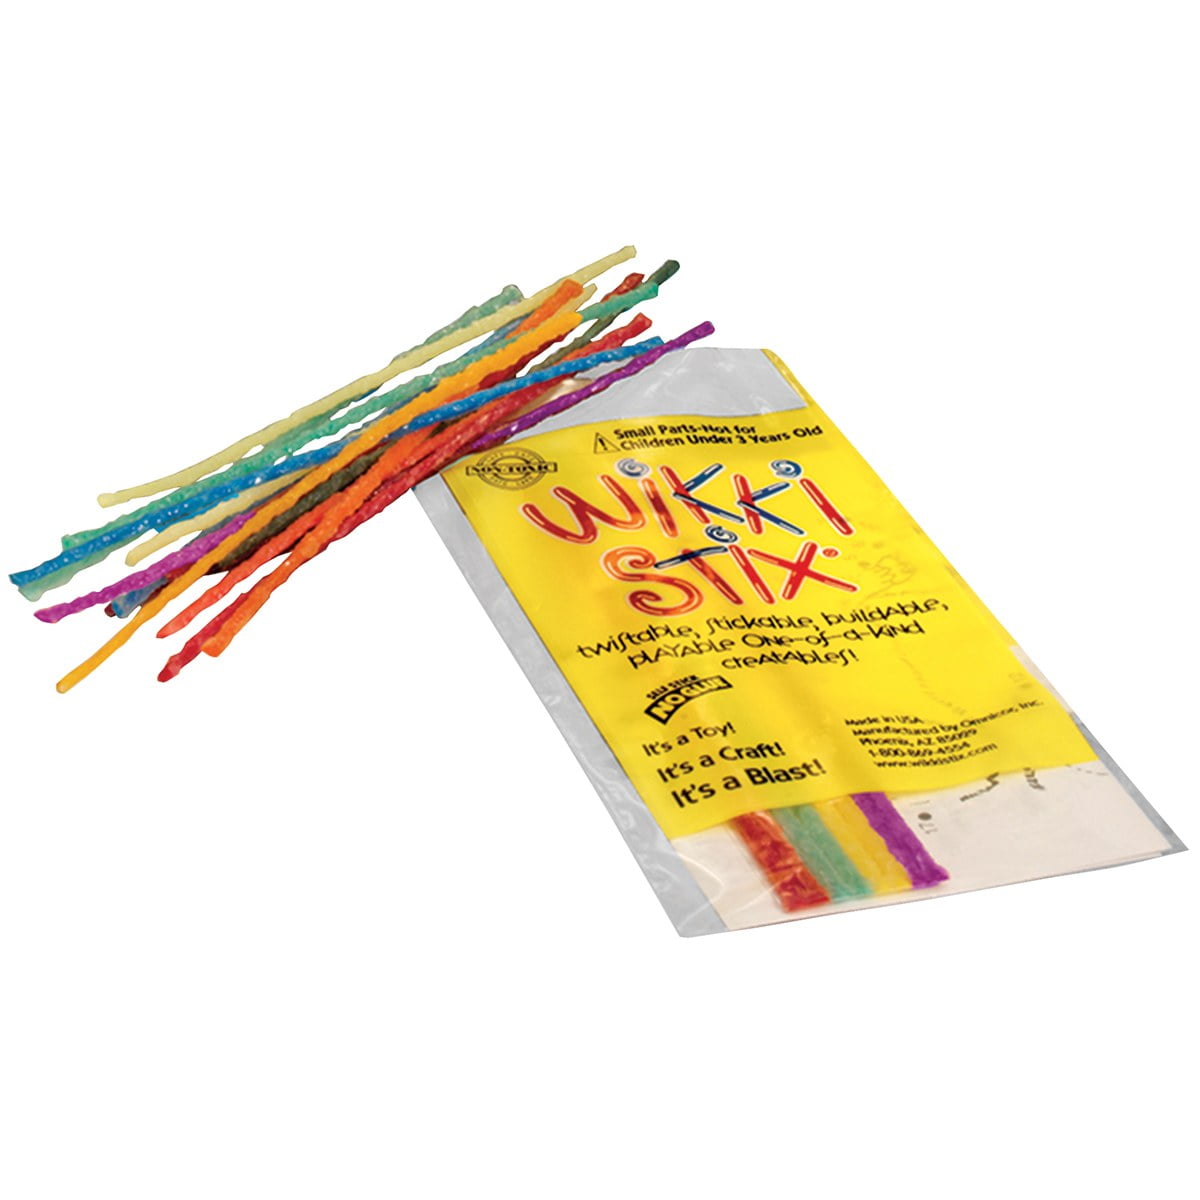 Wikki Stix - Individually Packaged - Assorted Fun Favors - Pack of 50 